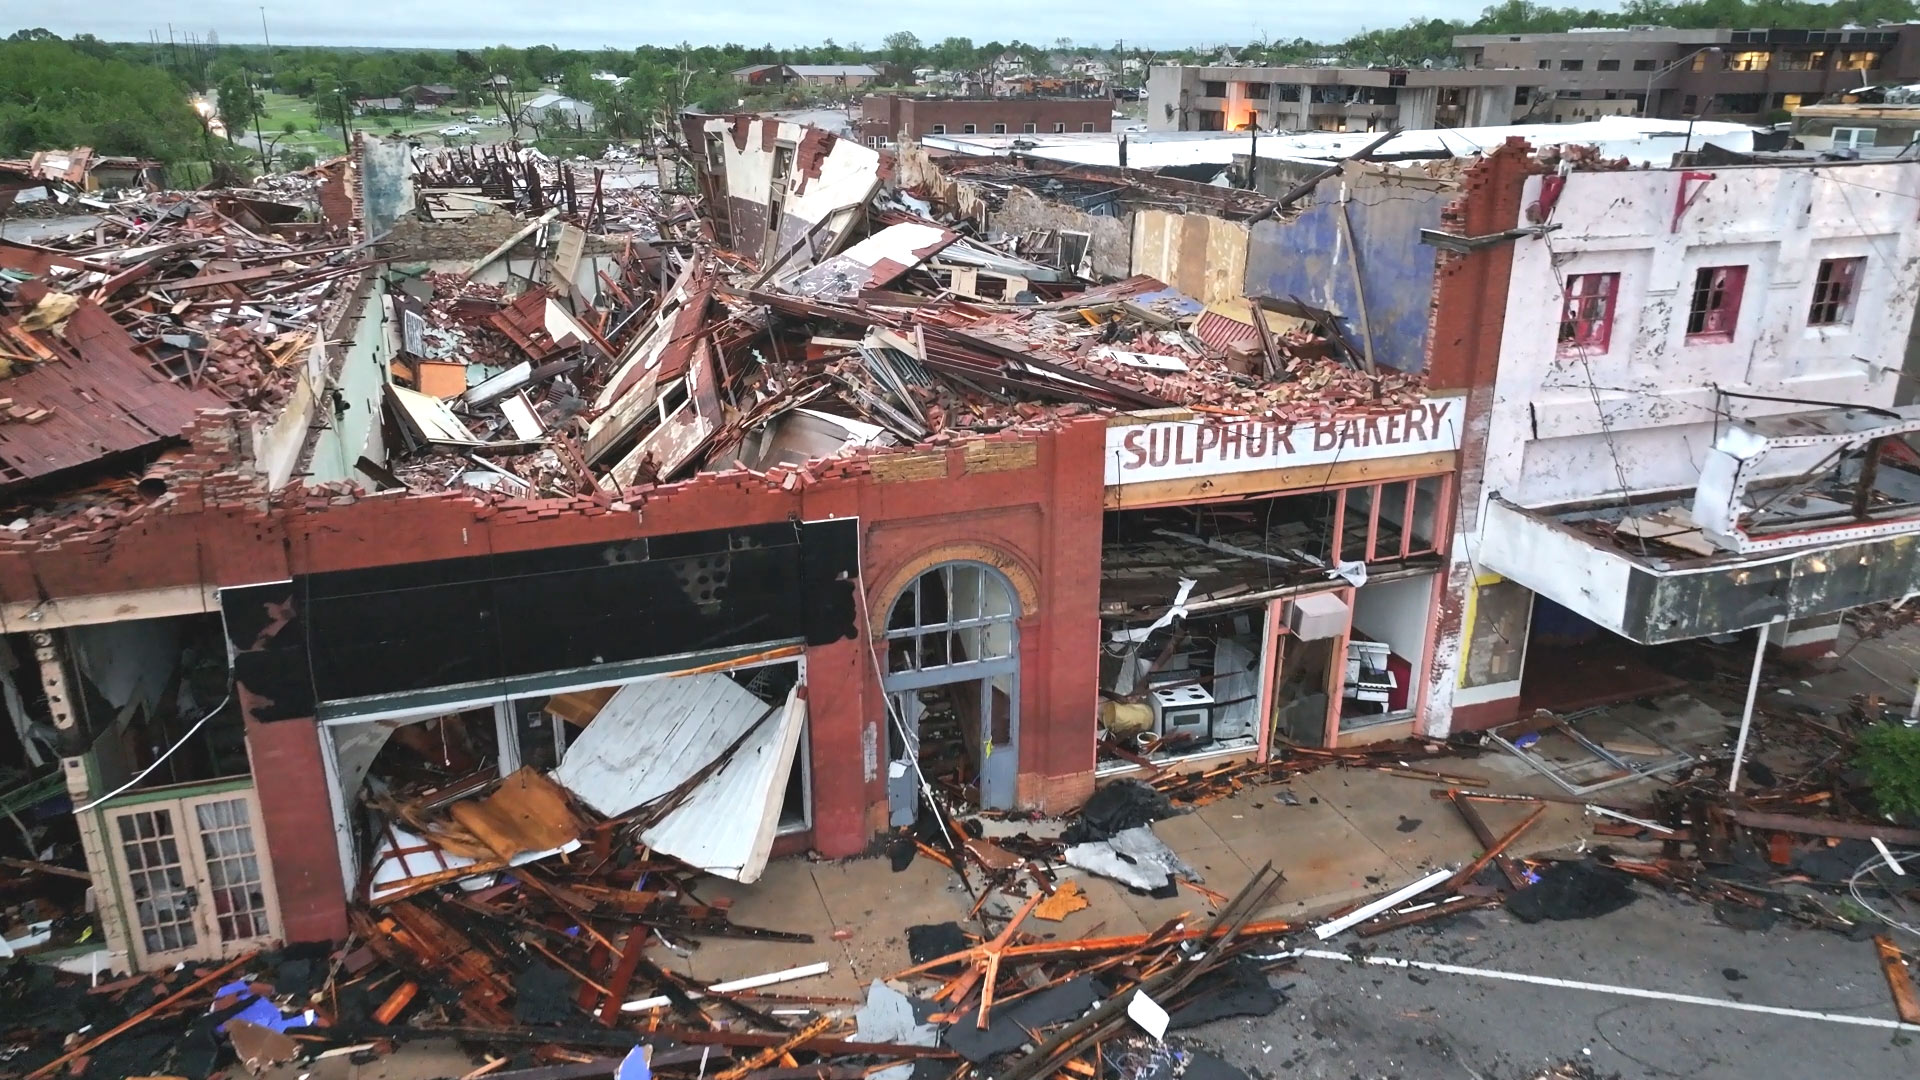 Complete destruction of commercial buildings in downtown Sulphur, Oklahoma, including a bakery.